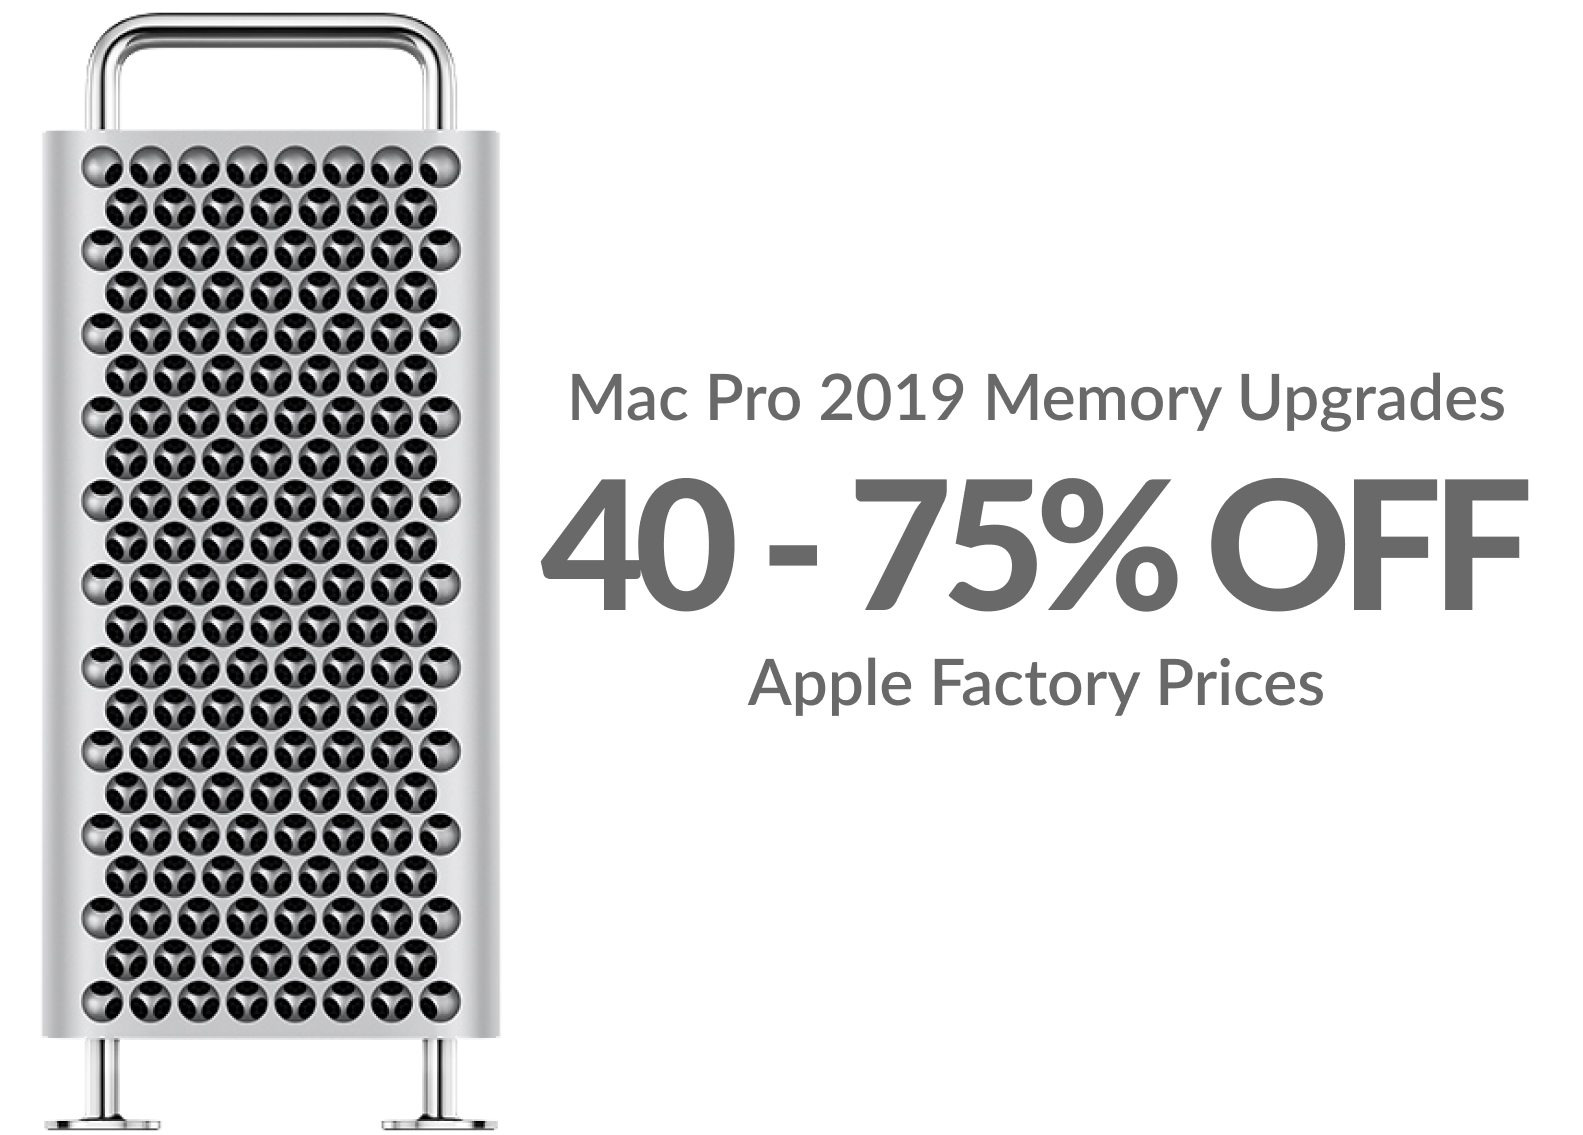 Mac Memory Upgrade 30-40% off Apple Factory Prices